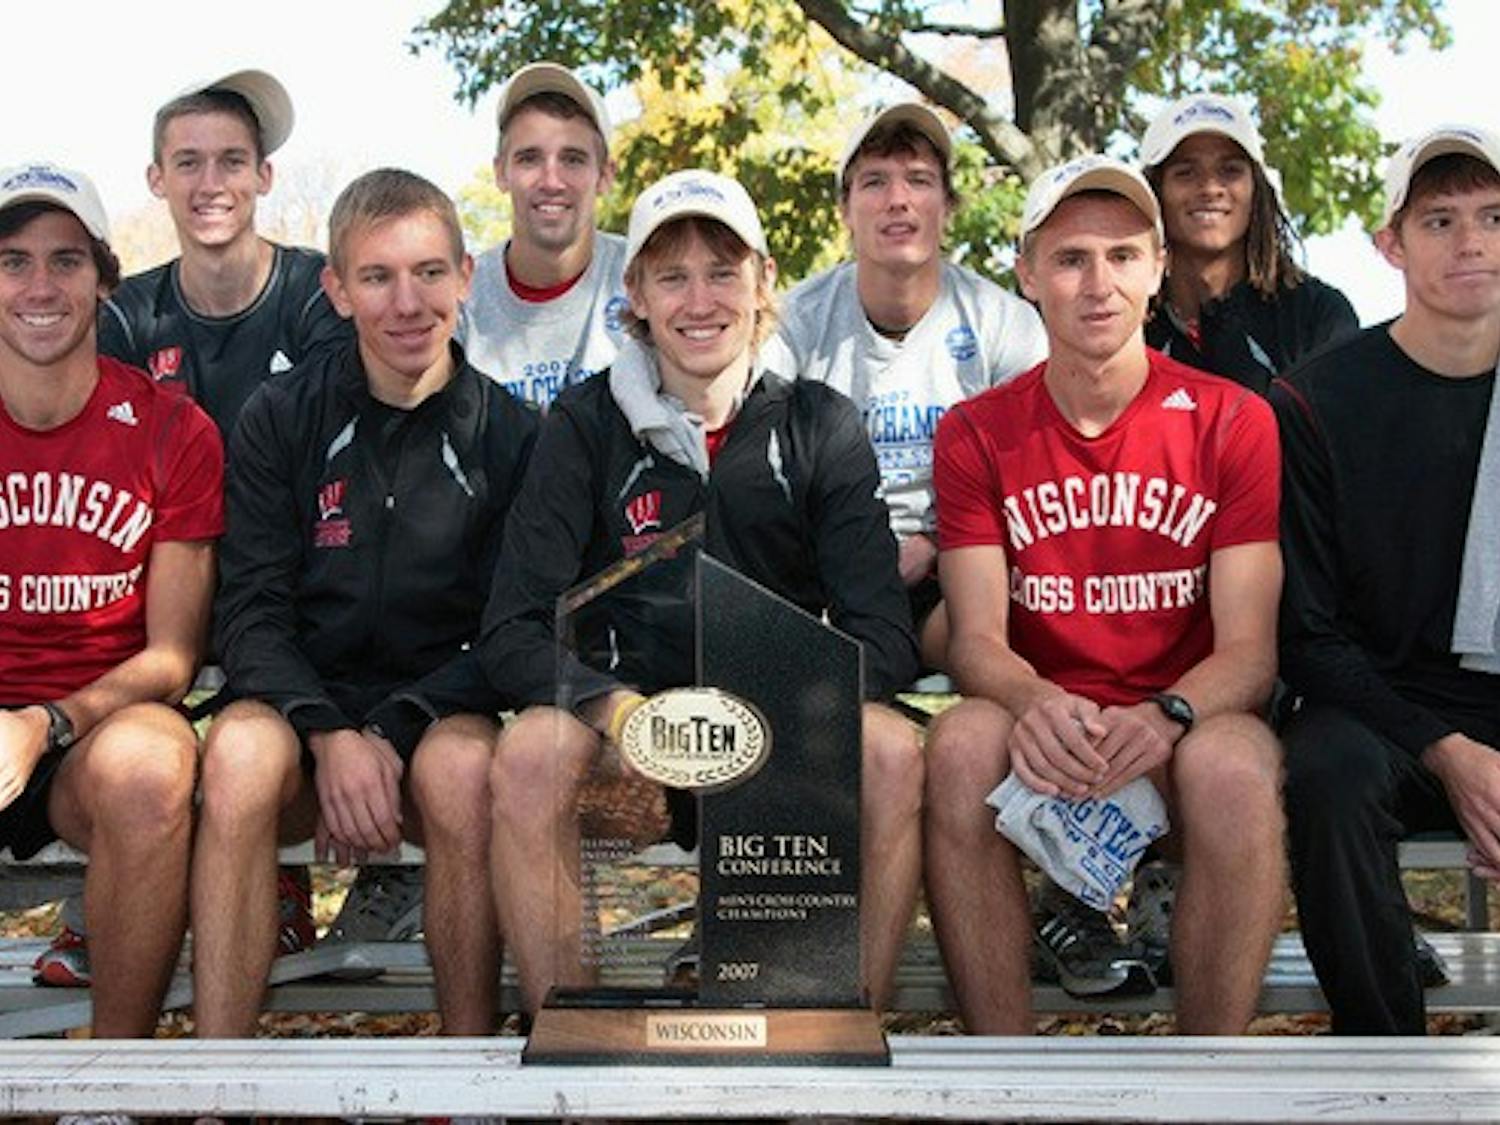 Running for the record books: Men's cross country claims ninth consecutive Big Ten title